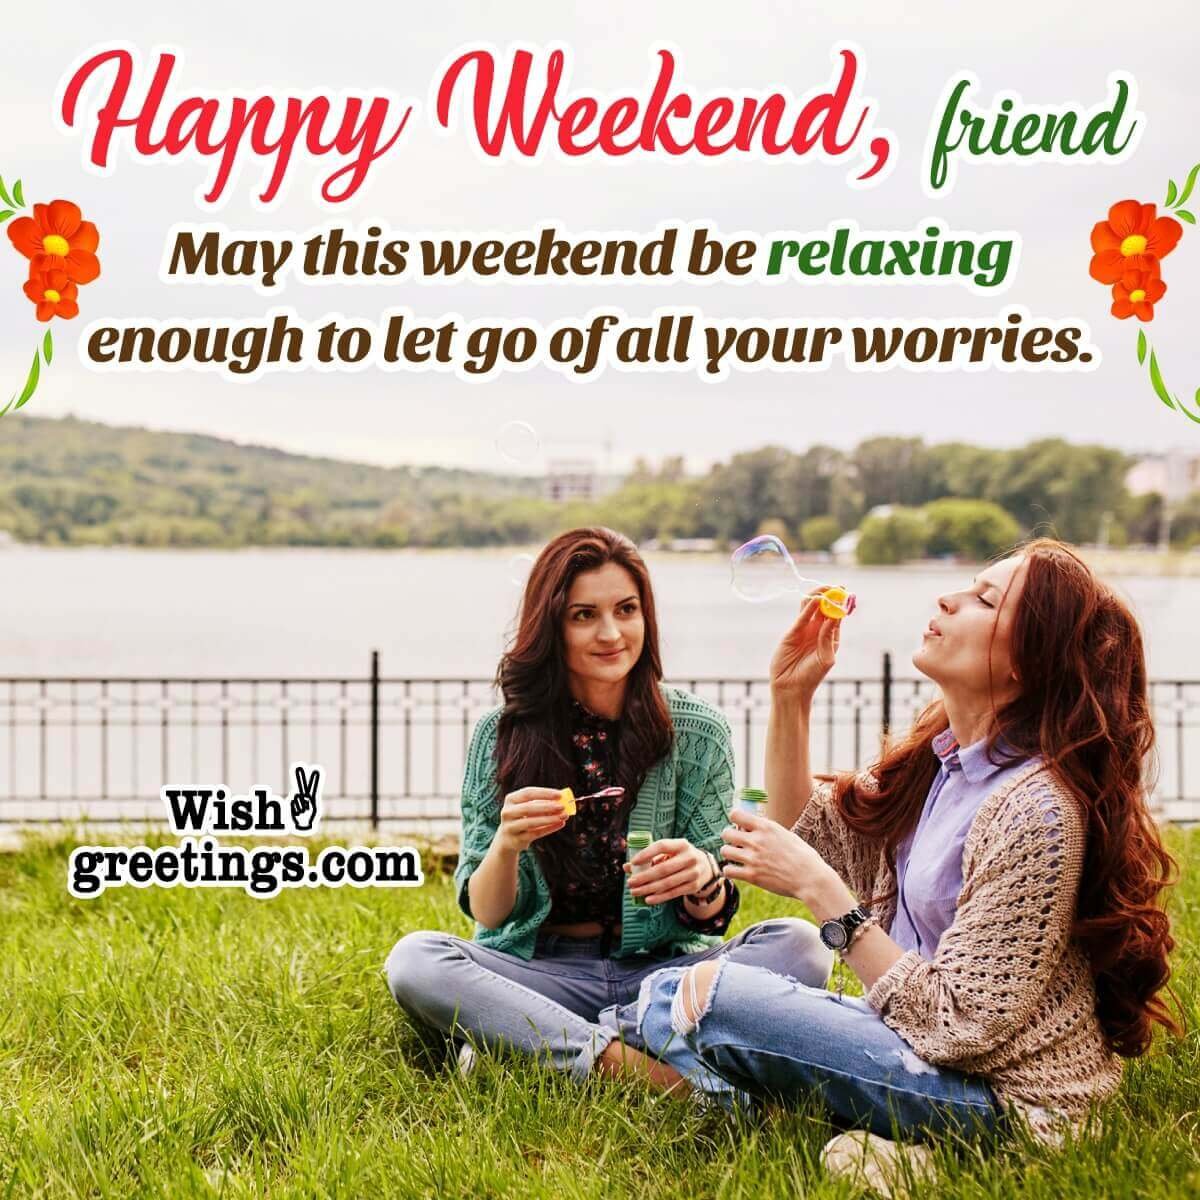 Happy Weekend Wish Image For Friends